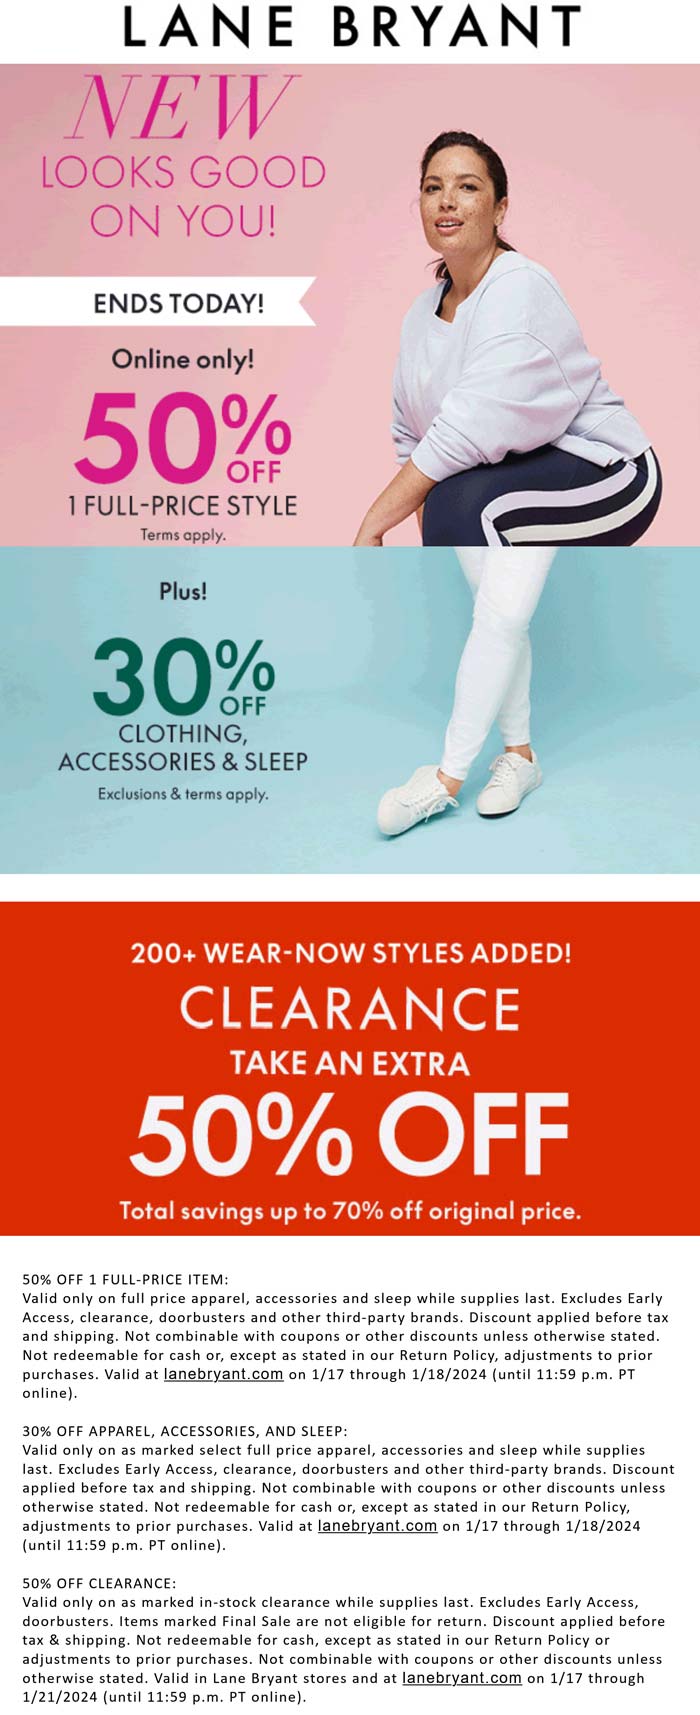 50% off a single item today online at Lane Bryant #lanebryant